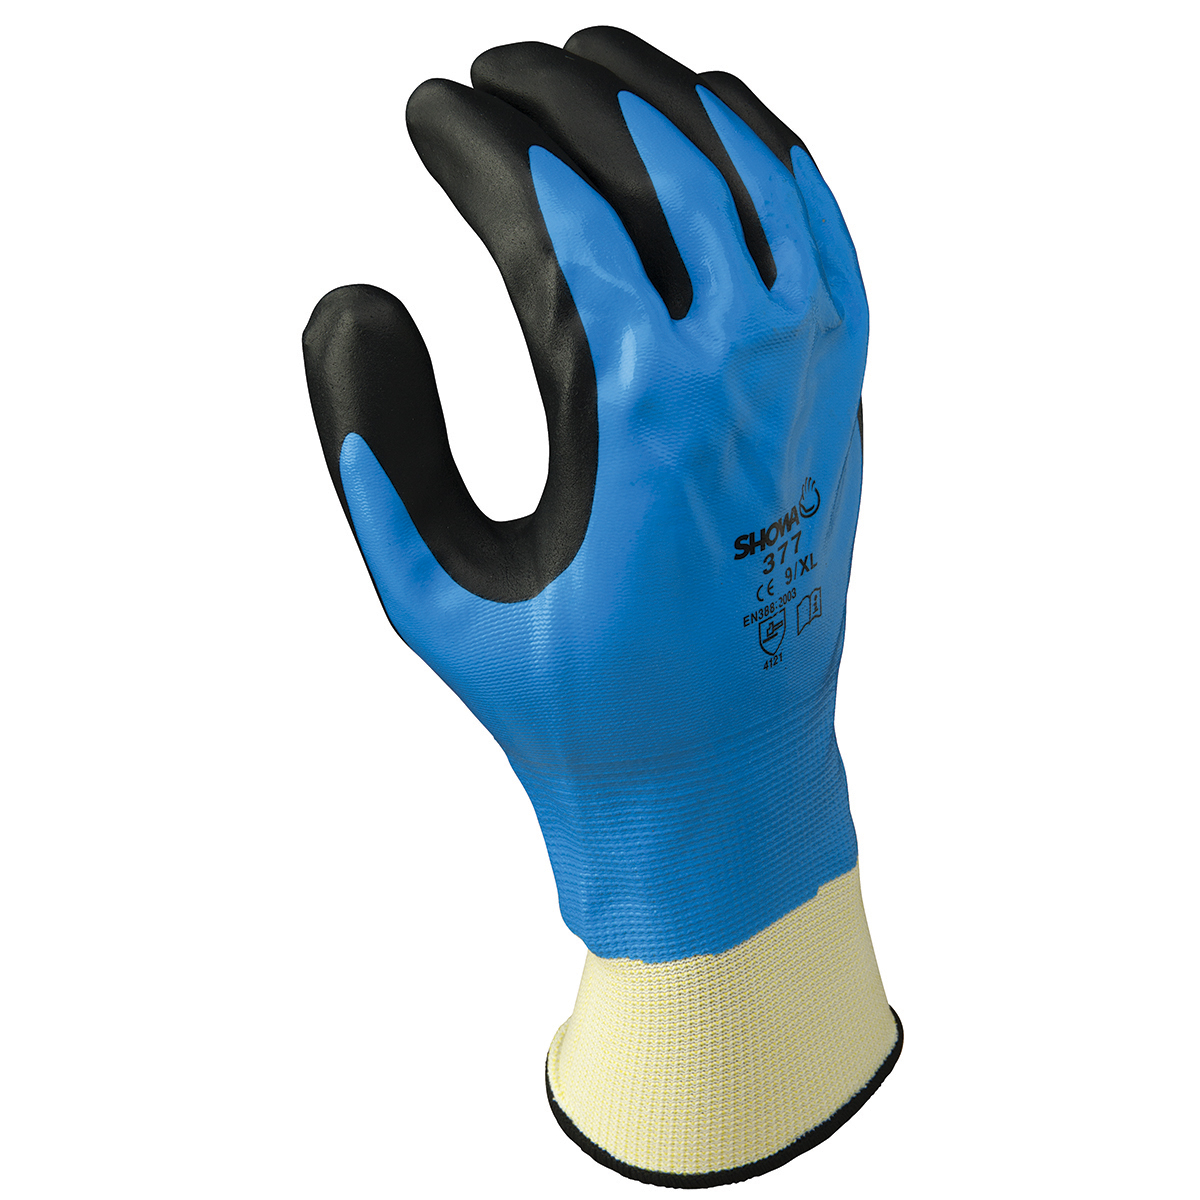 SHOWA® Size 6 13 Gauge Foam Nitrile Full Hand Coated Work Gloves With Seamless Knit Liner And Knit Wrist